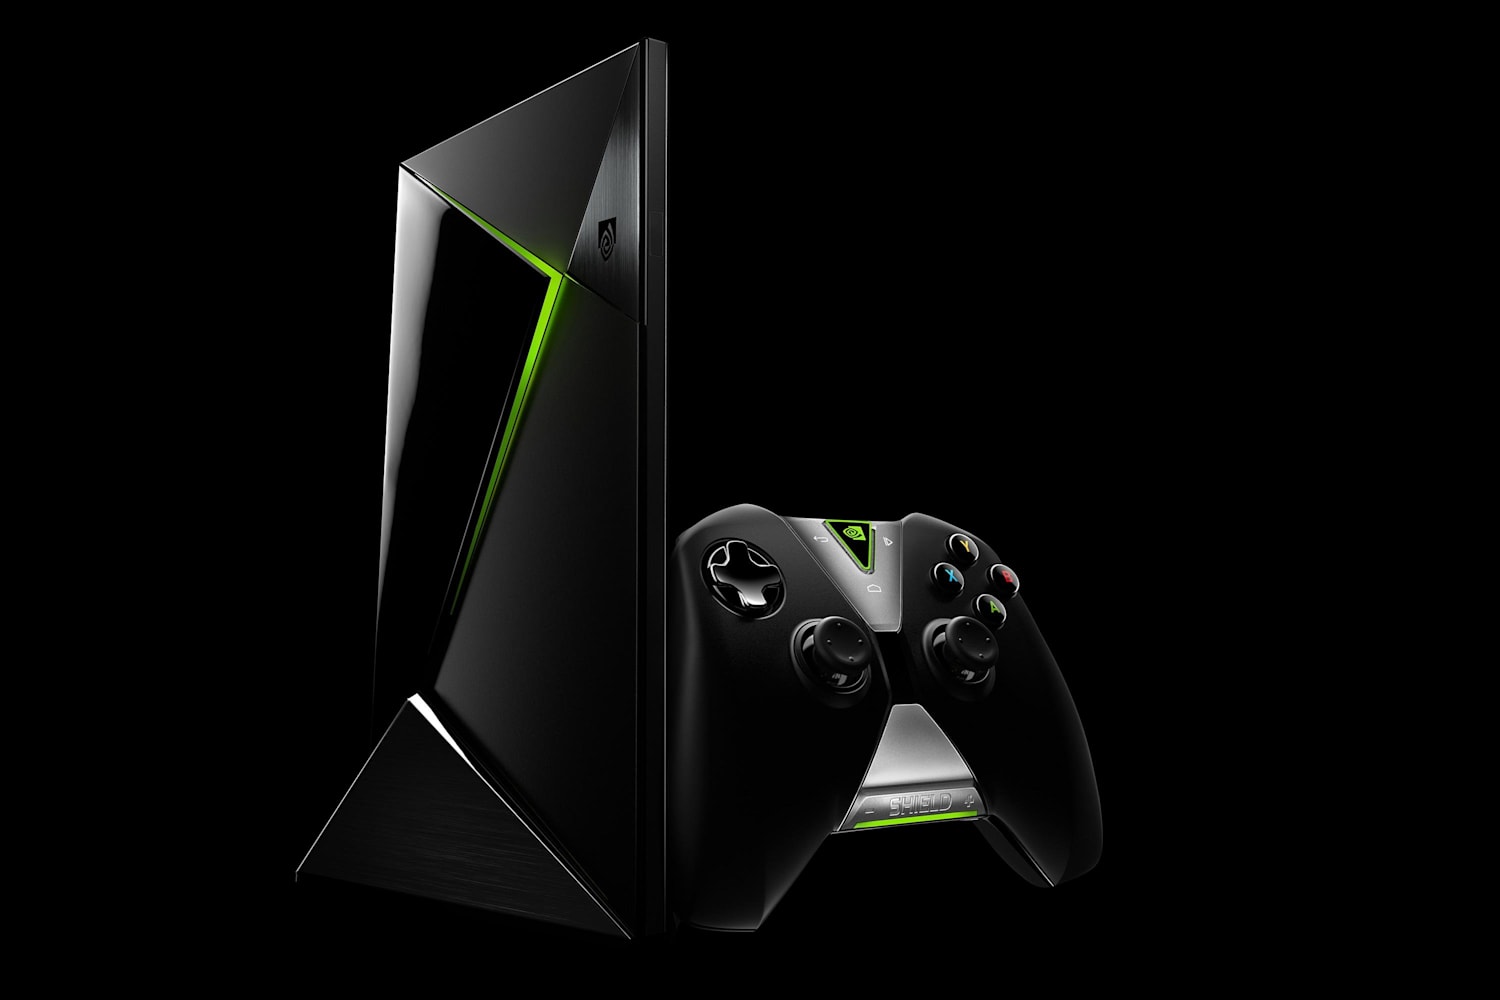 Latest Nvidia Shield TV Update Boosts AI Upscaling, Remote Control Features